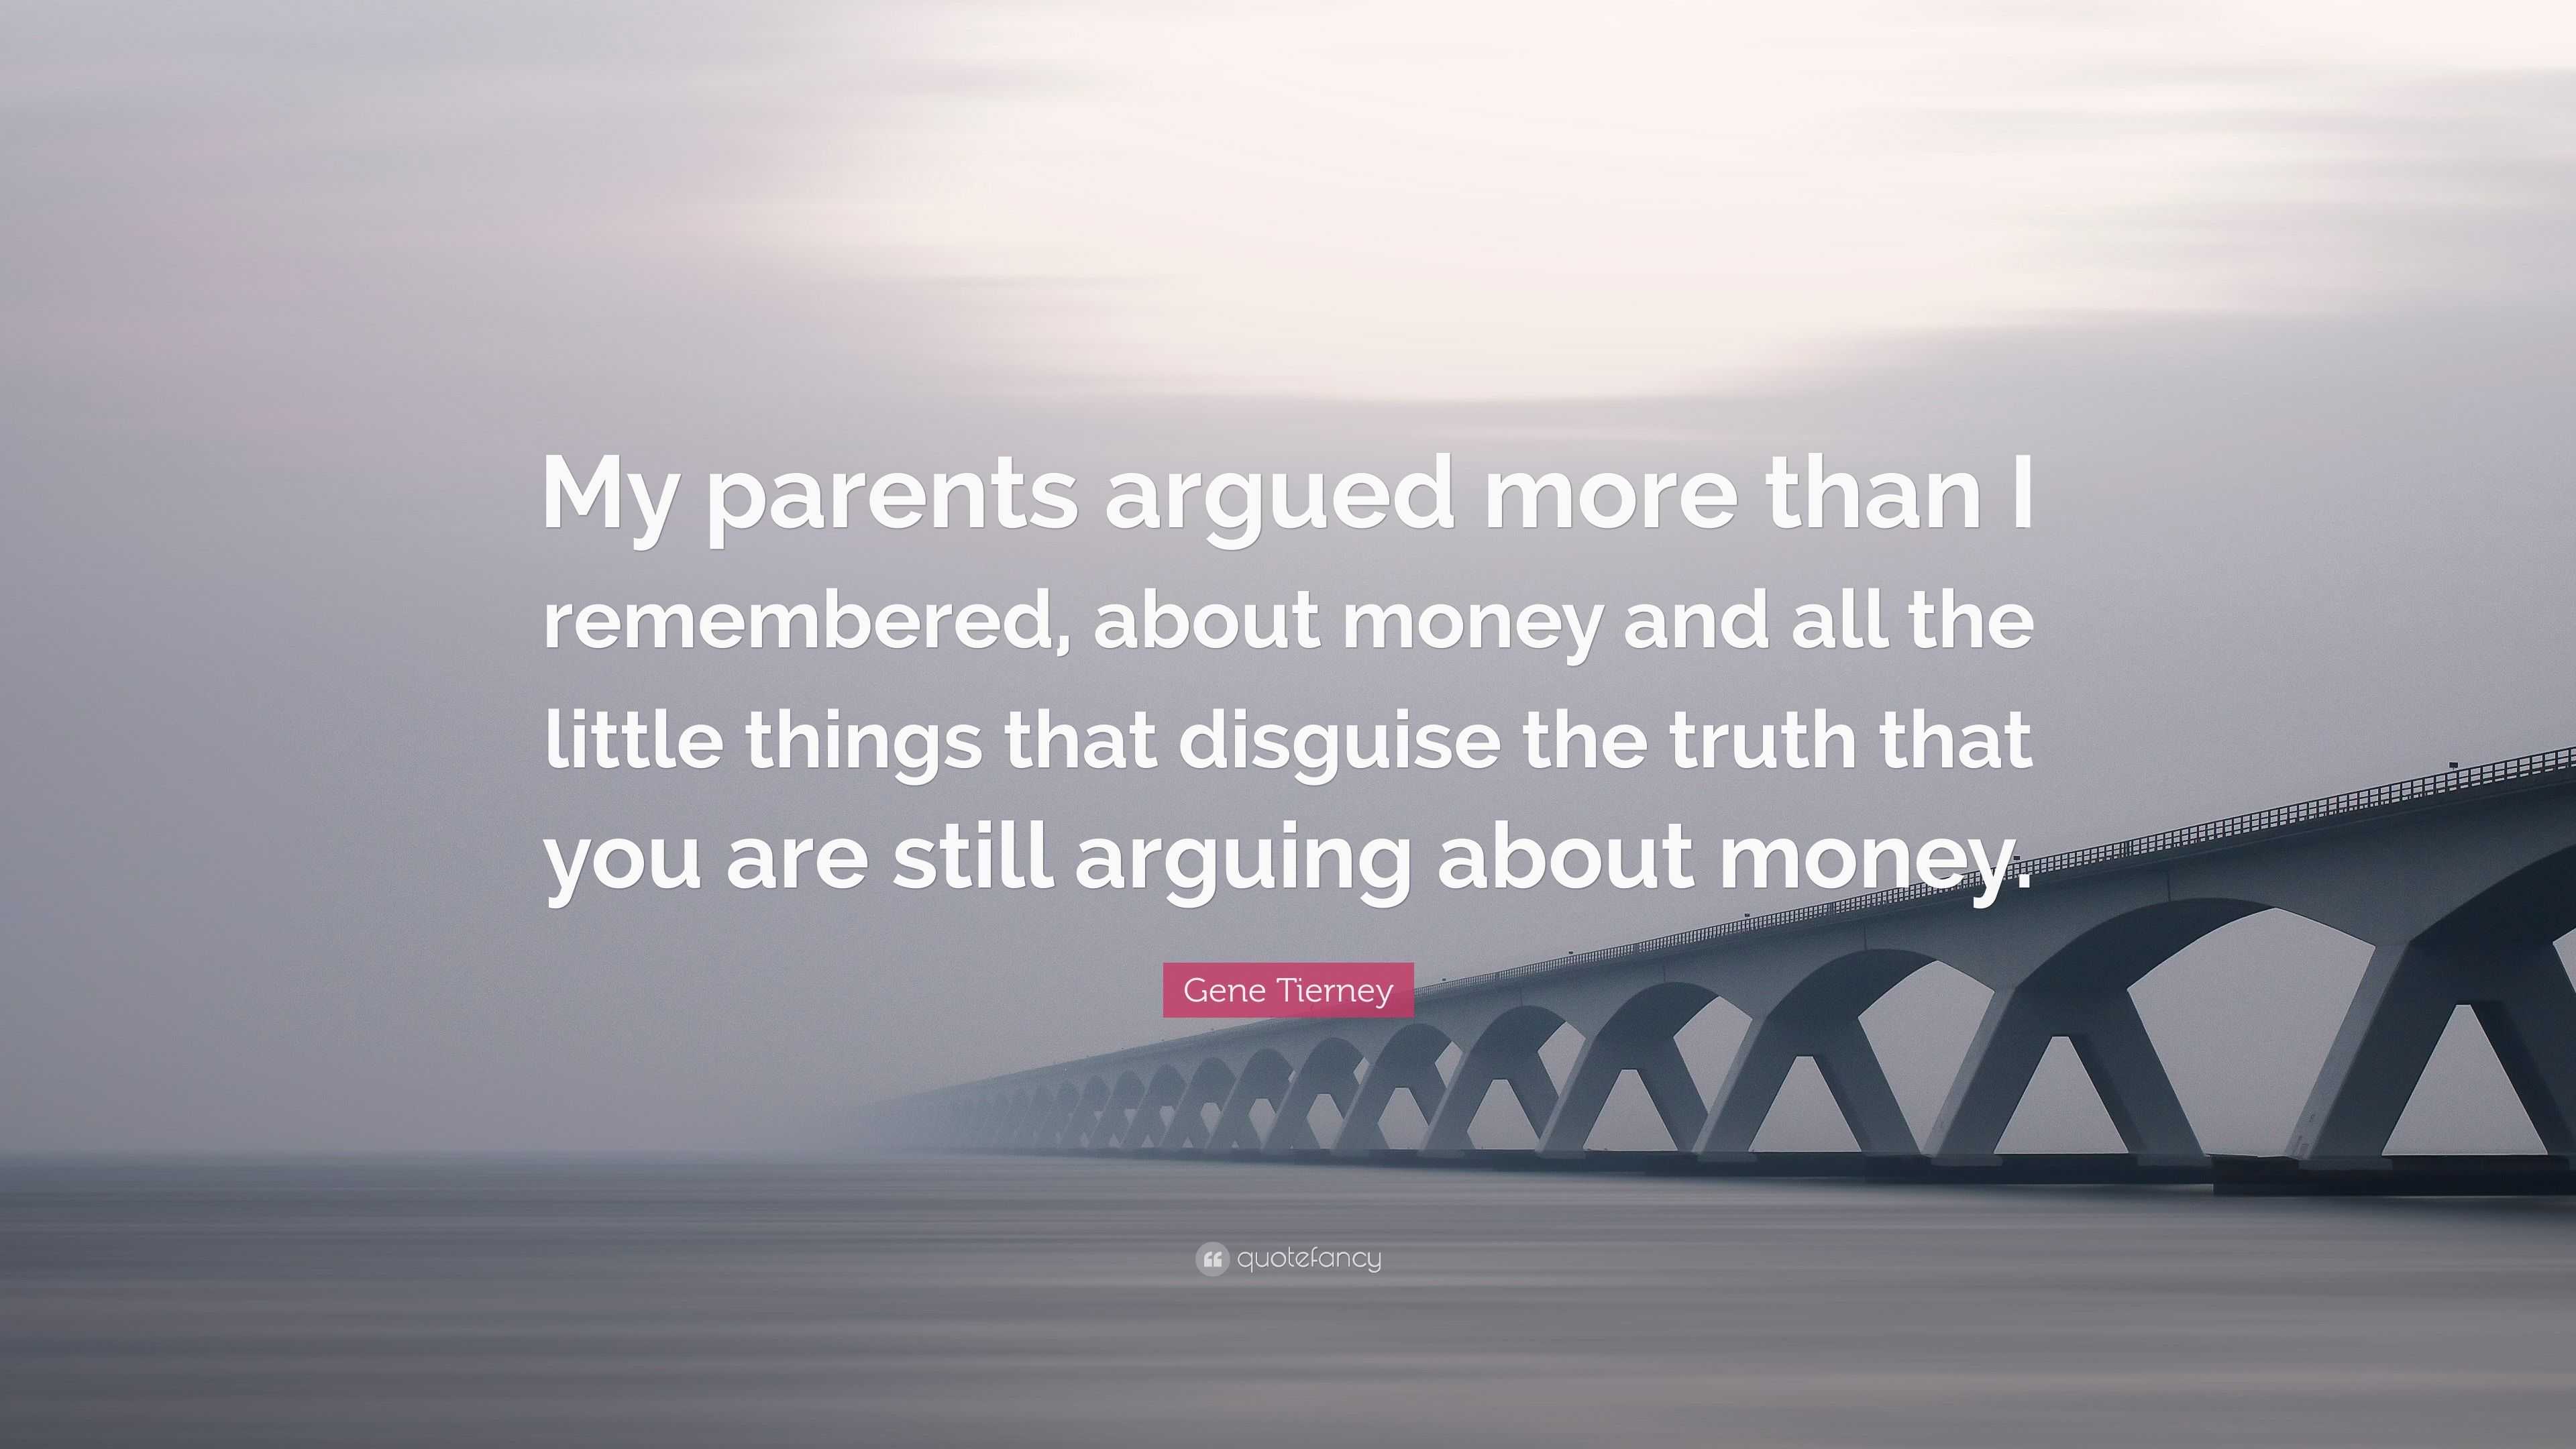 Gene Tierney Quote: “My parents argued more than I remembered, about ...